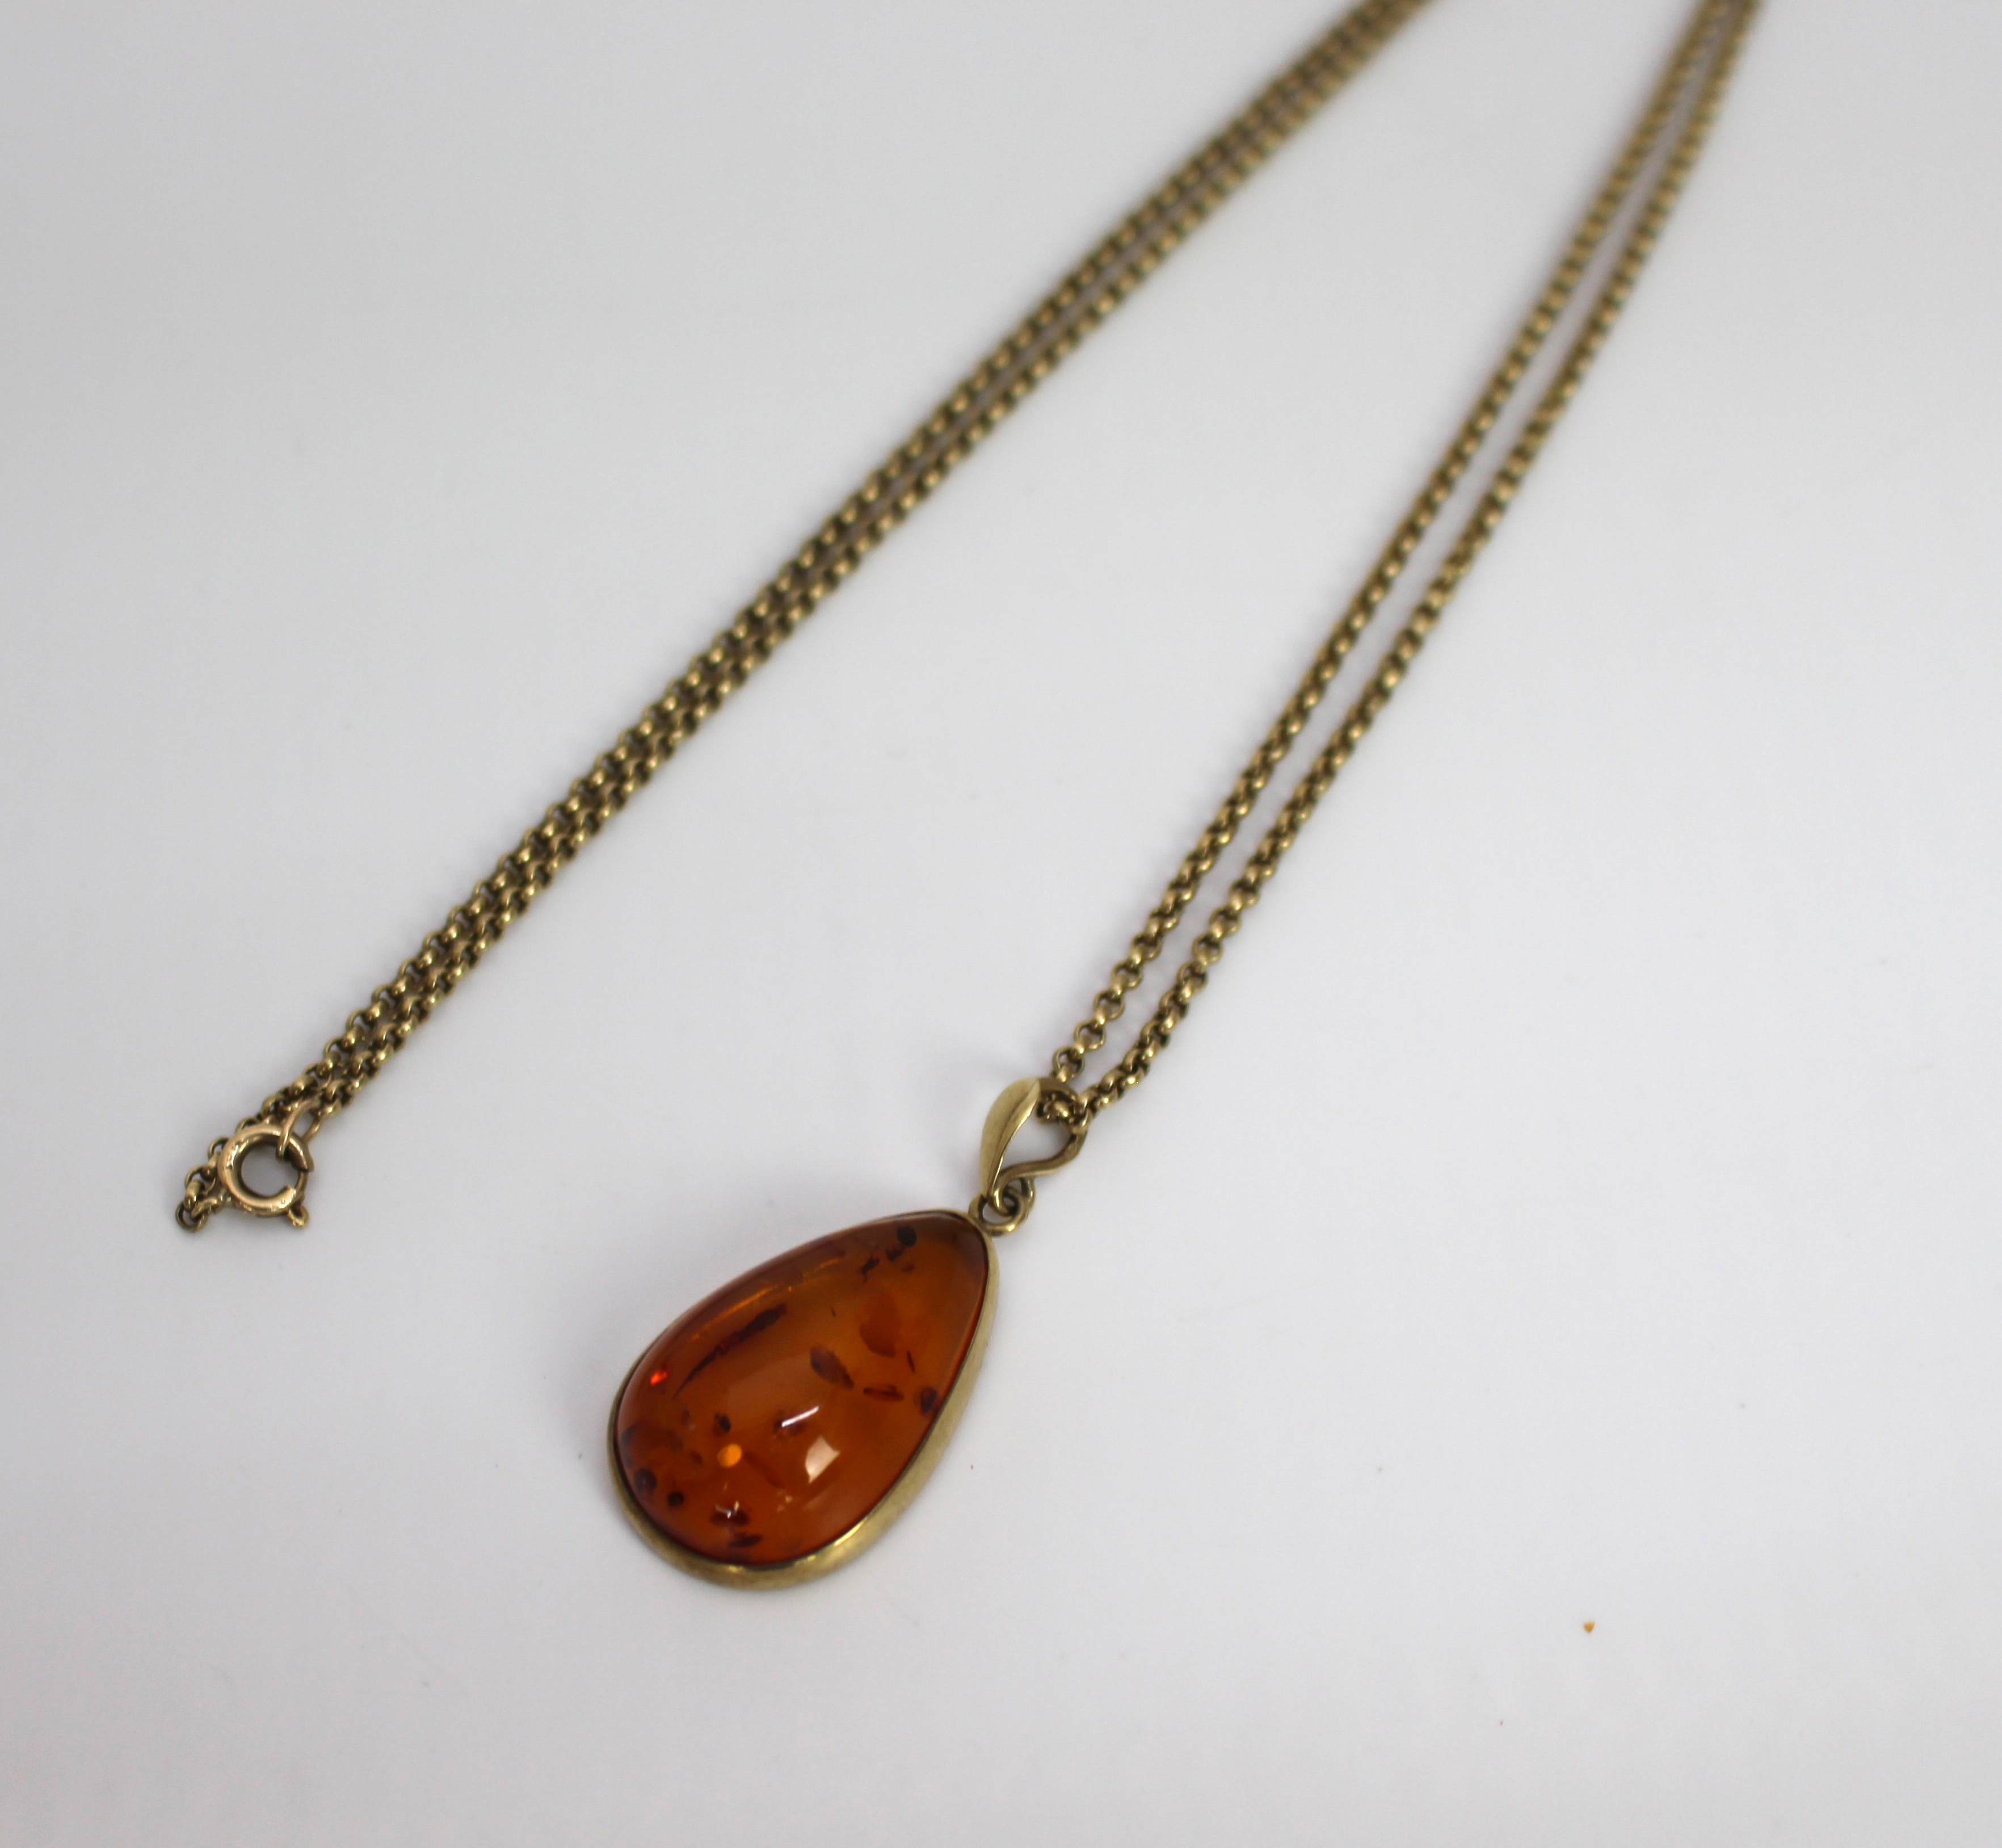 Amber Pendant on Gold Chain - Image 2 of 4